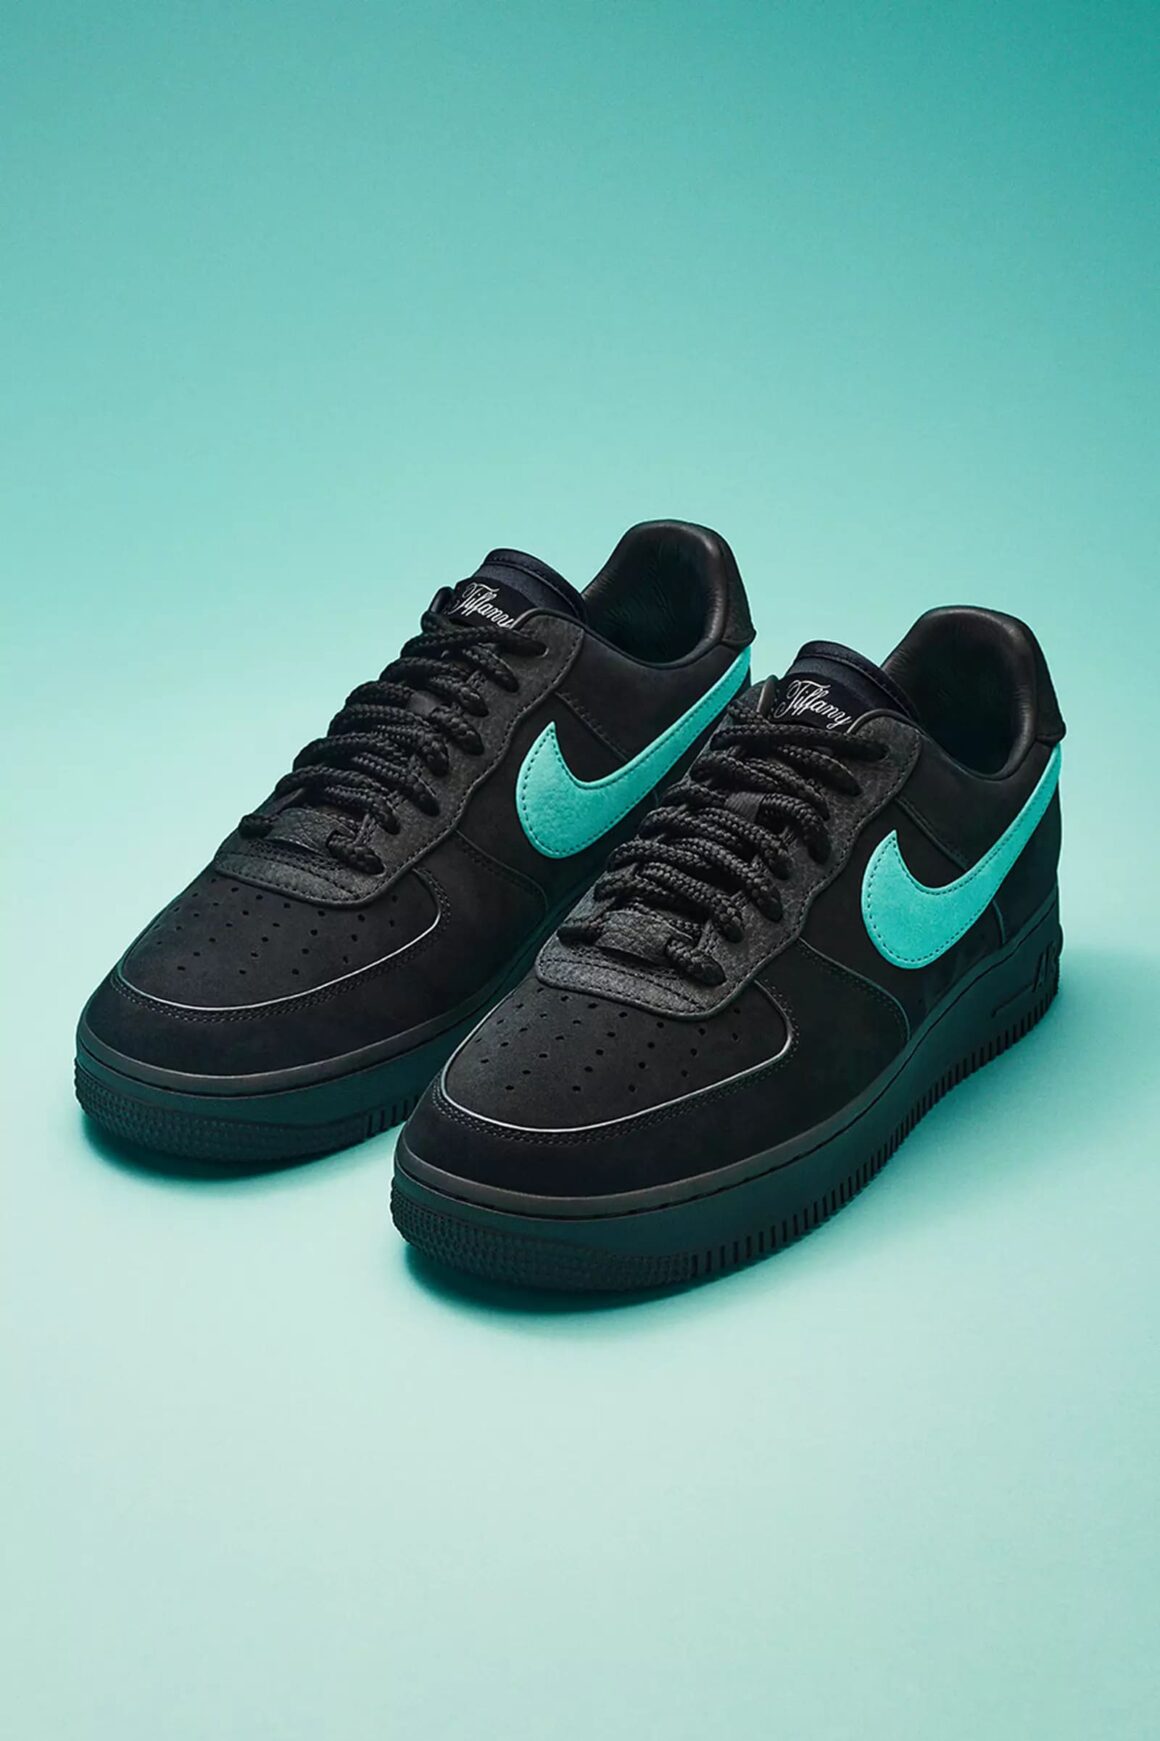 Tiffany & Co. x Nike Air Force 1 Low DZ1382-001 Full Shoes